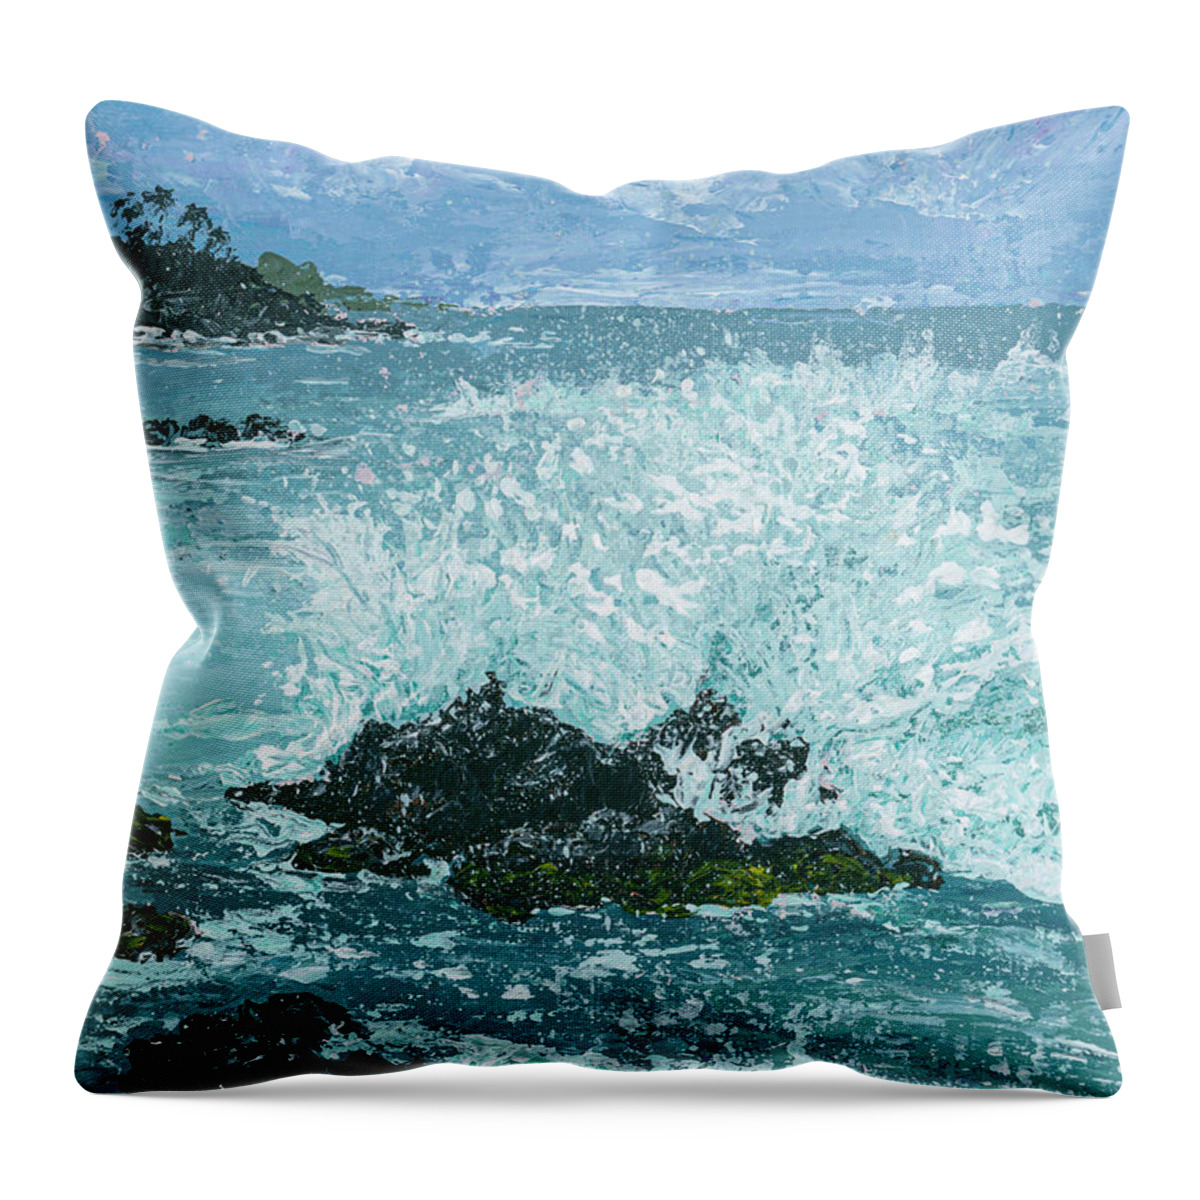 Seascape Throw Pillow featuring the painting Maui Waves by Darice Machel McGuire